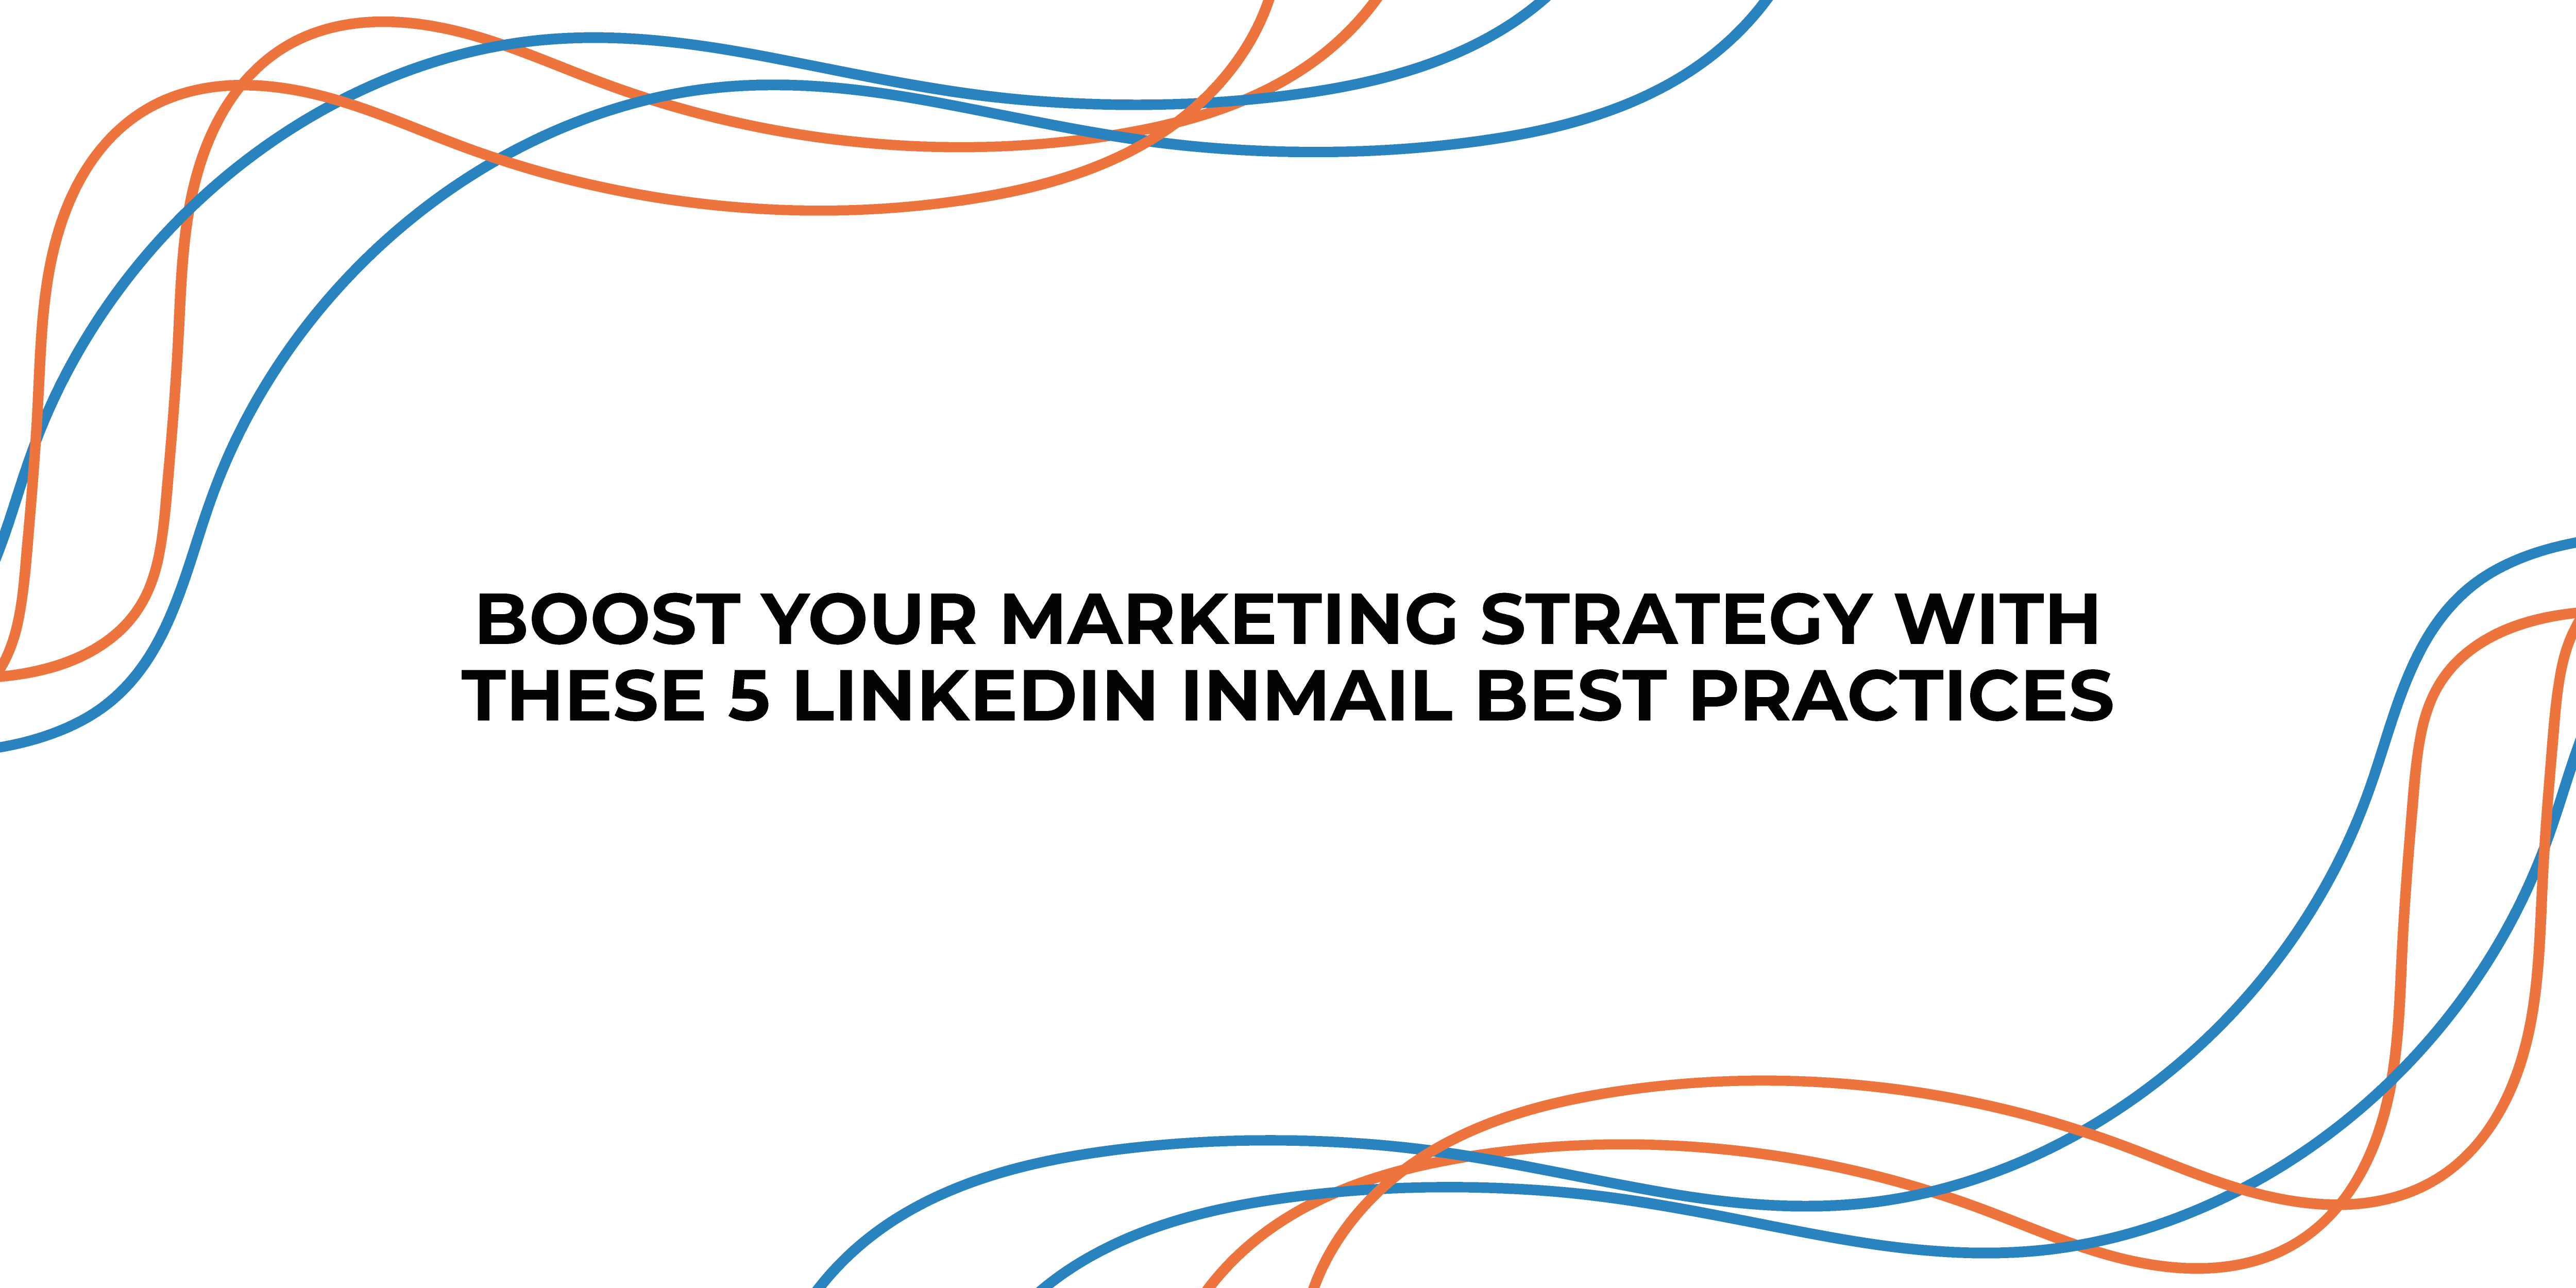 oost Your Marketing Strategy with These 5 LinkedIn InMail Best Practices